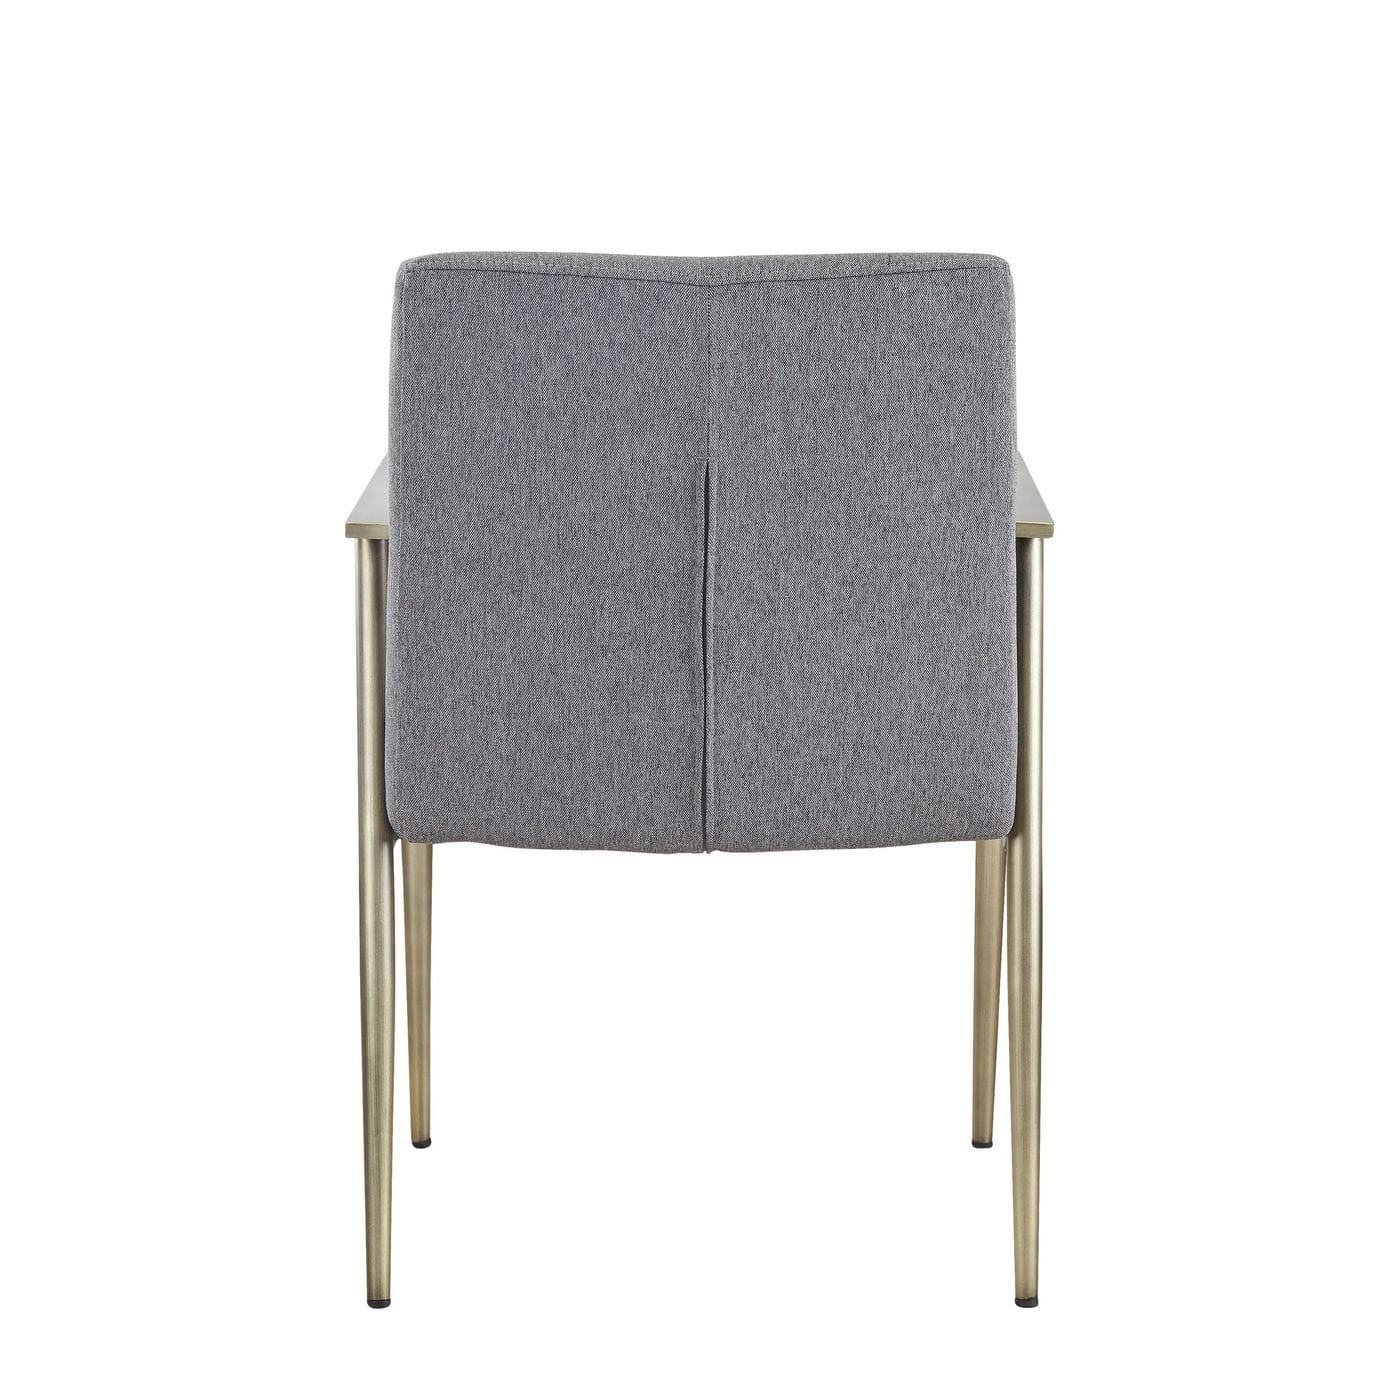 Modrest Sabri - Contemporary Grey & Antique Brass Arm Dining Chair-Dining Chair-VIG-Wall2Wall Furnishings